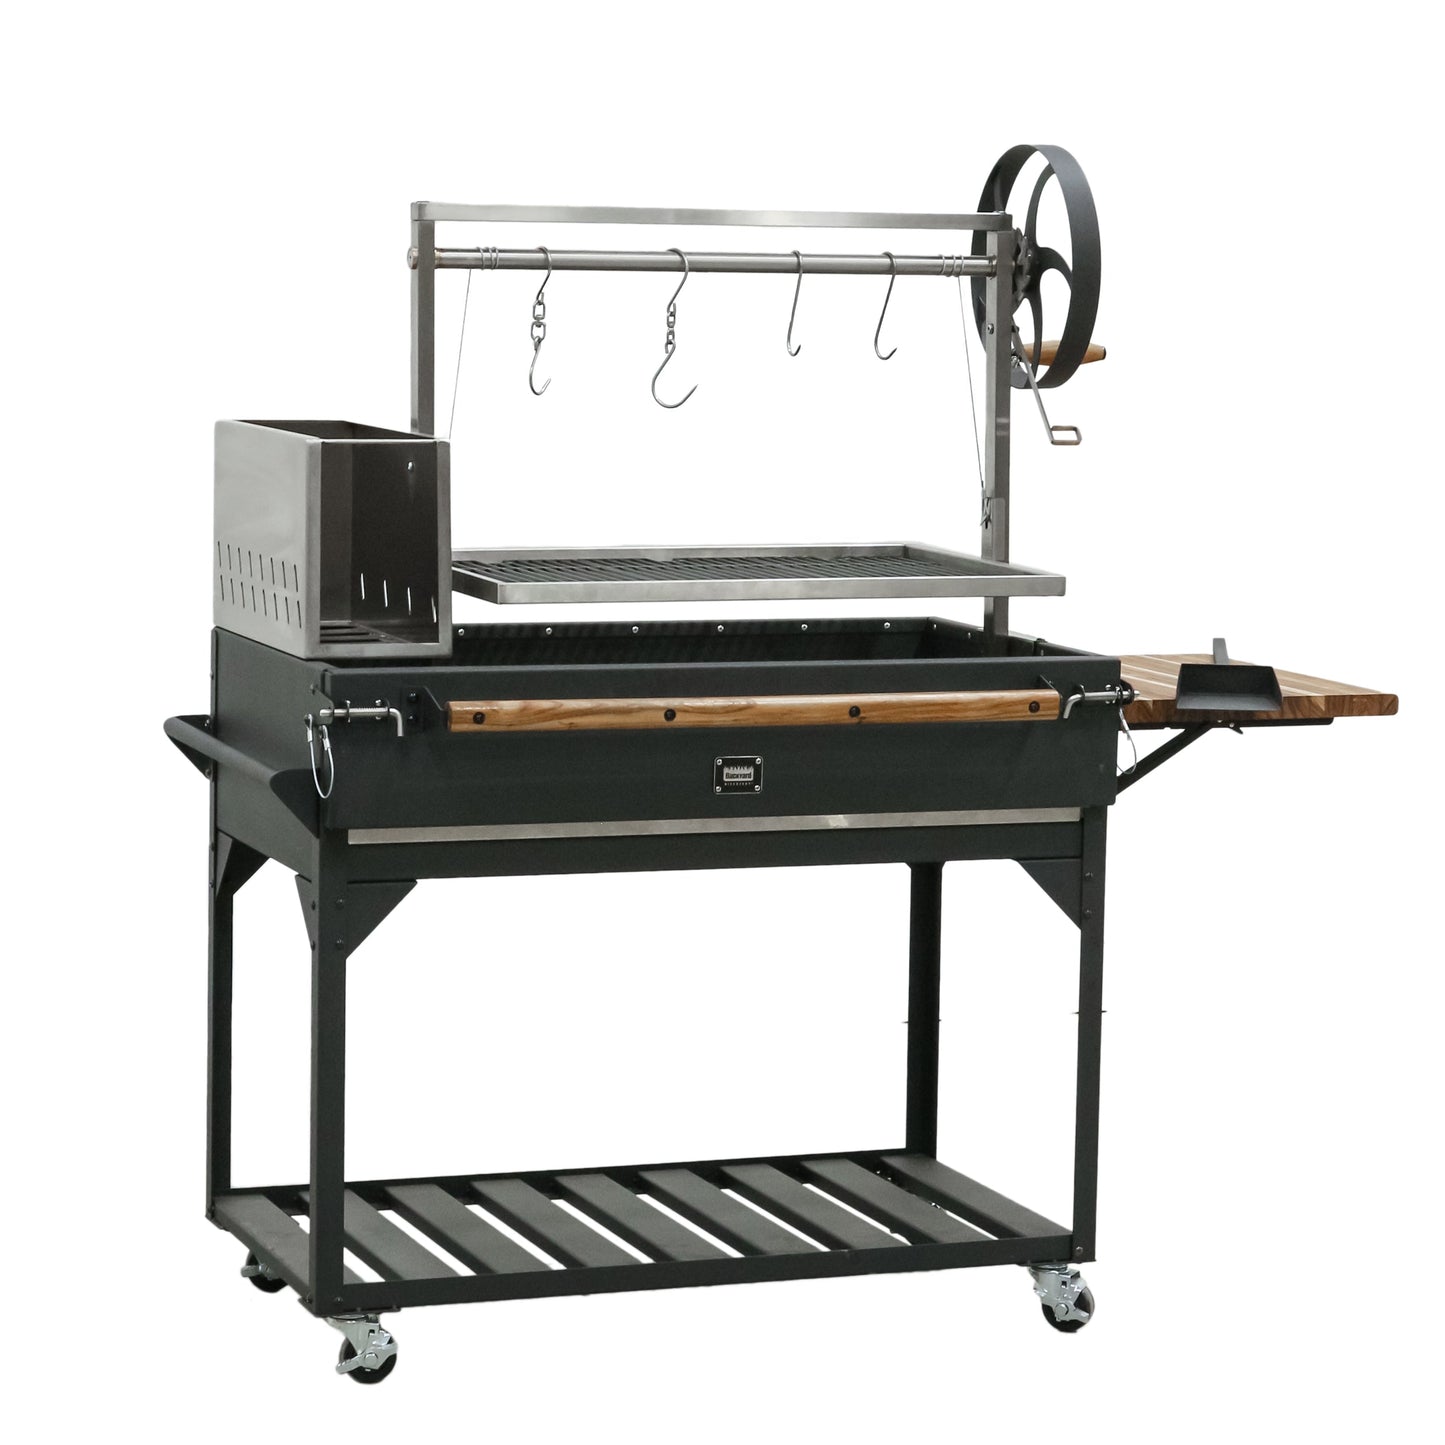 Premium Argentine/Santa Maria BBQ Grill with Wood Fire and Charcoal Grill